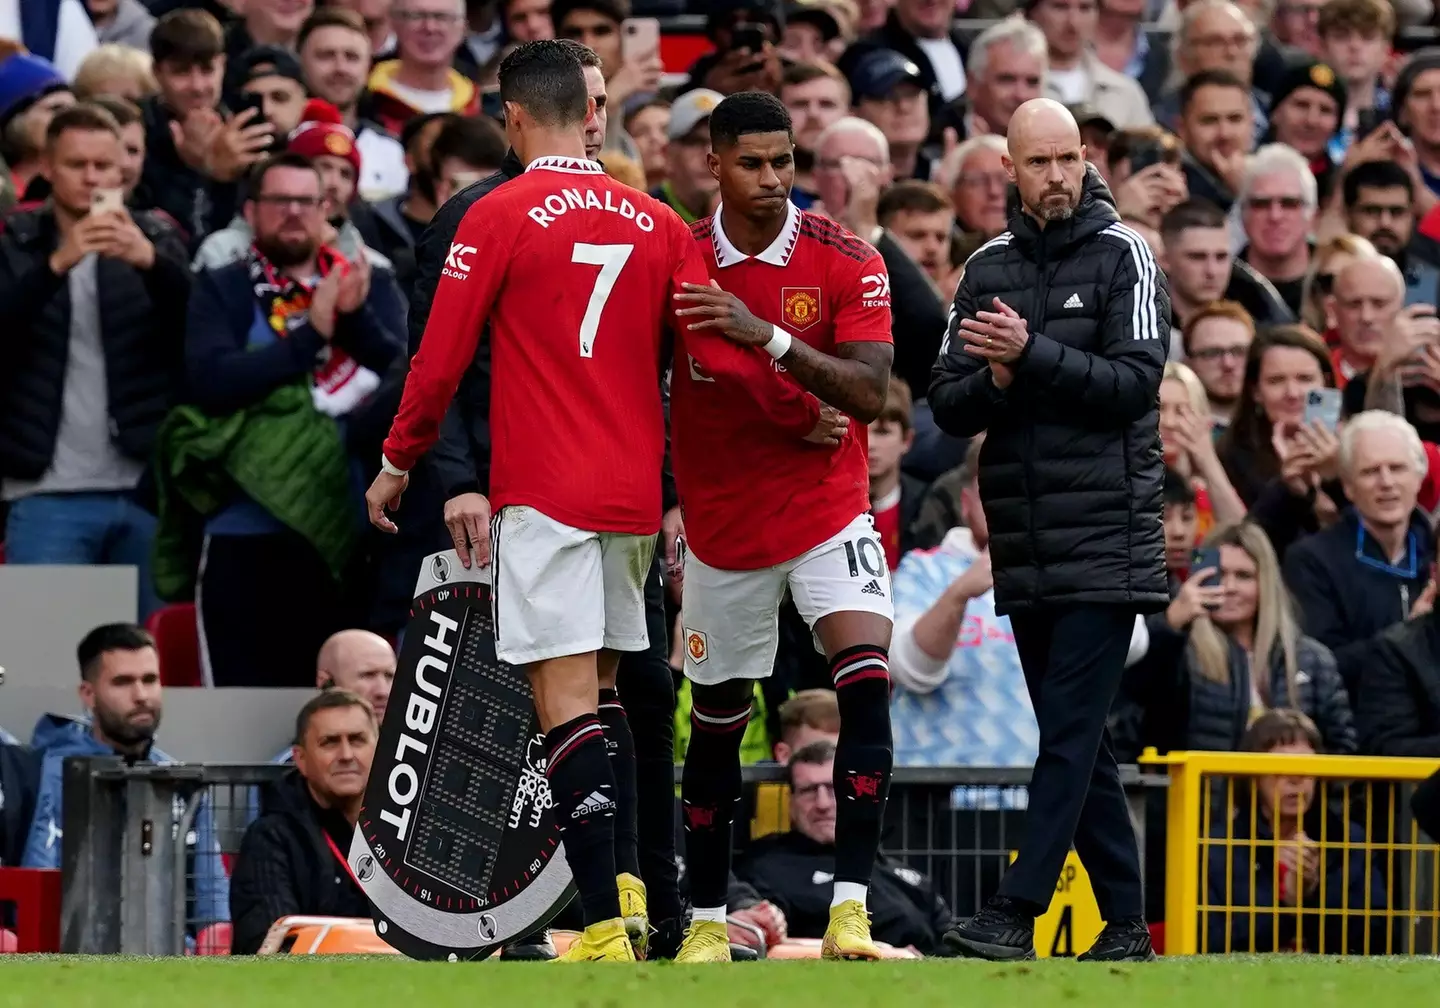 Ronaldo wasn't happy to be subbed off at the weekend. Image: Alamy